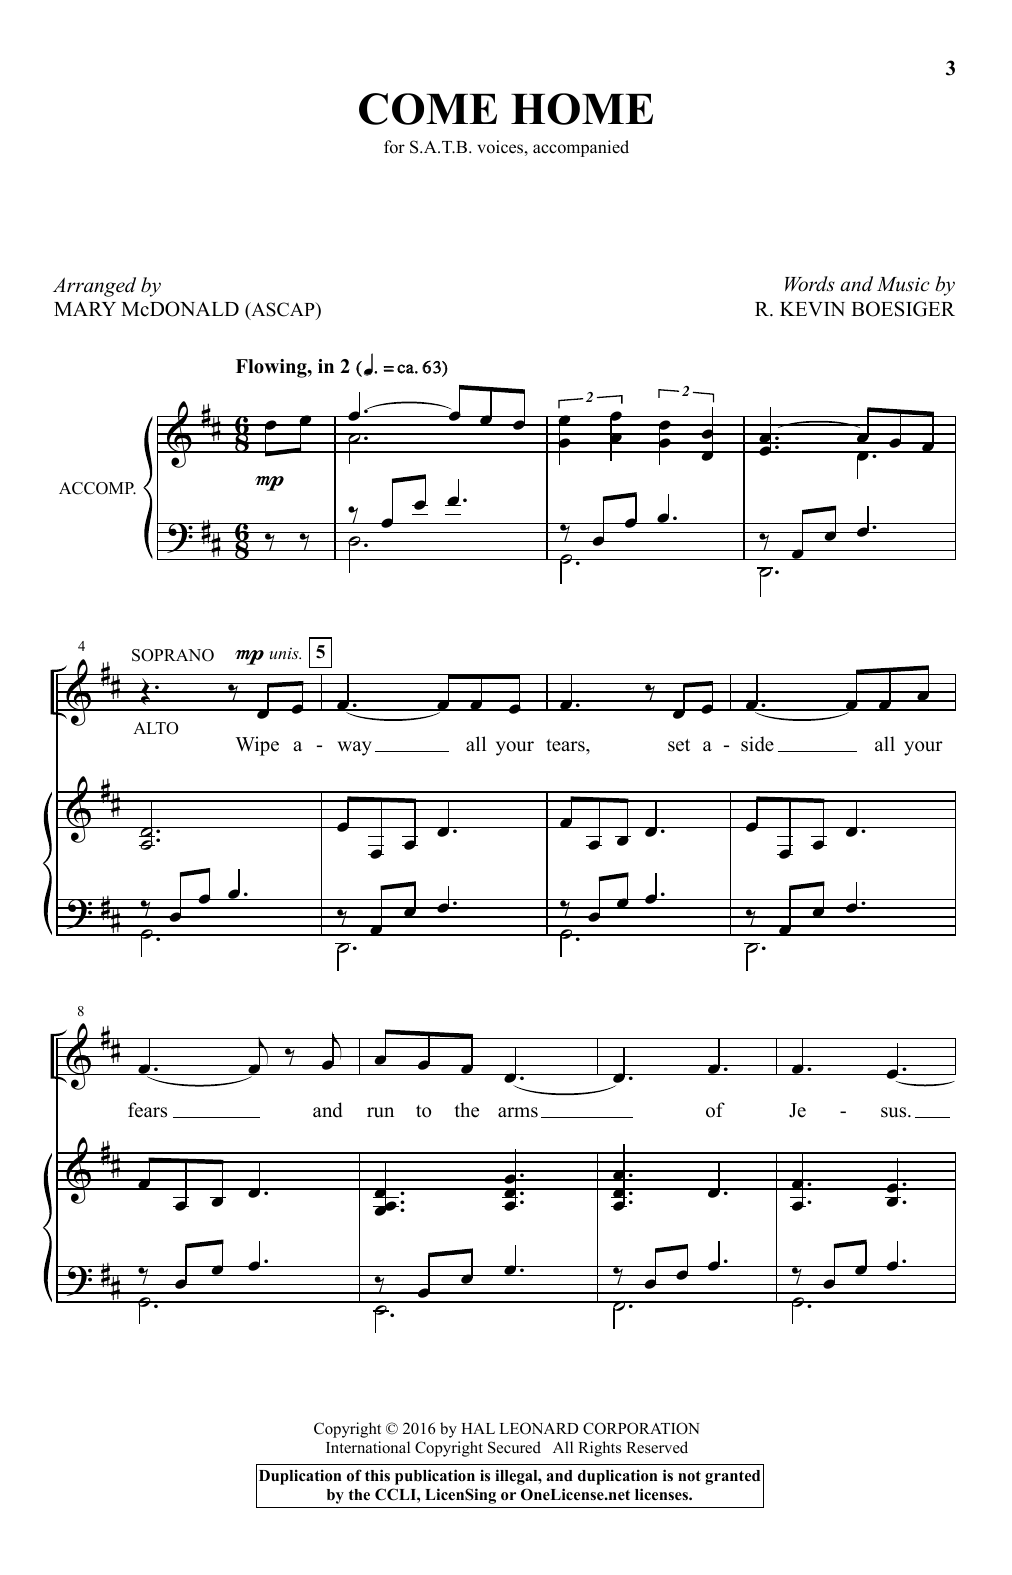 Download Mary McDonald Come Home Sheet Music